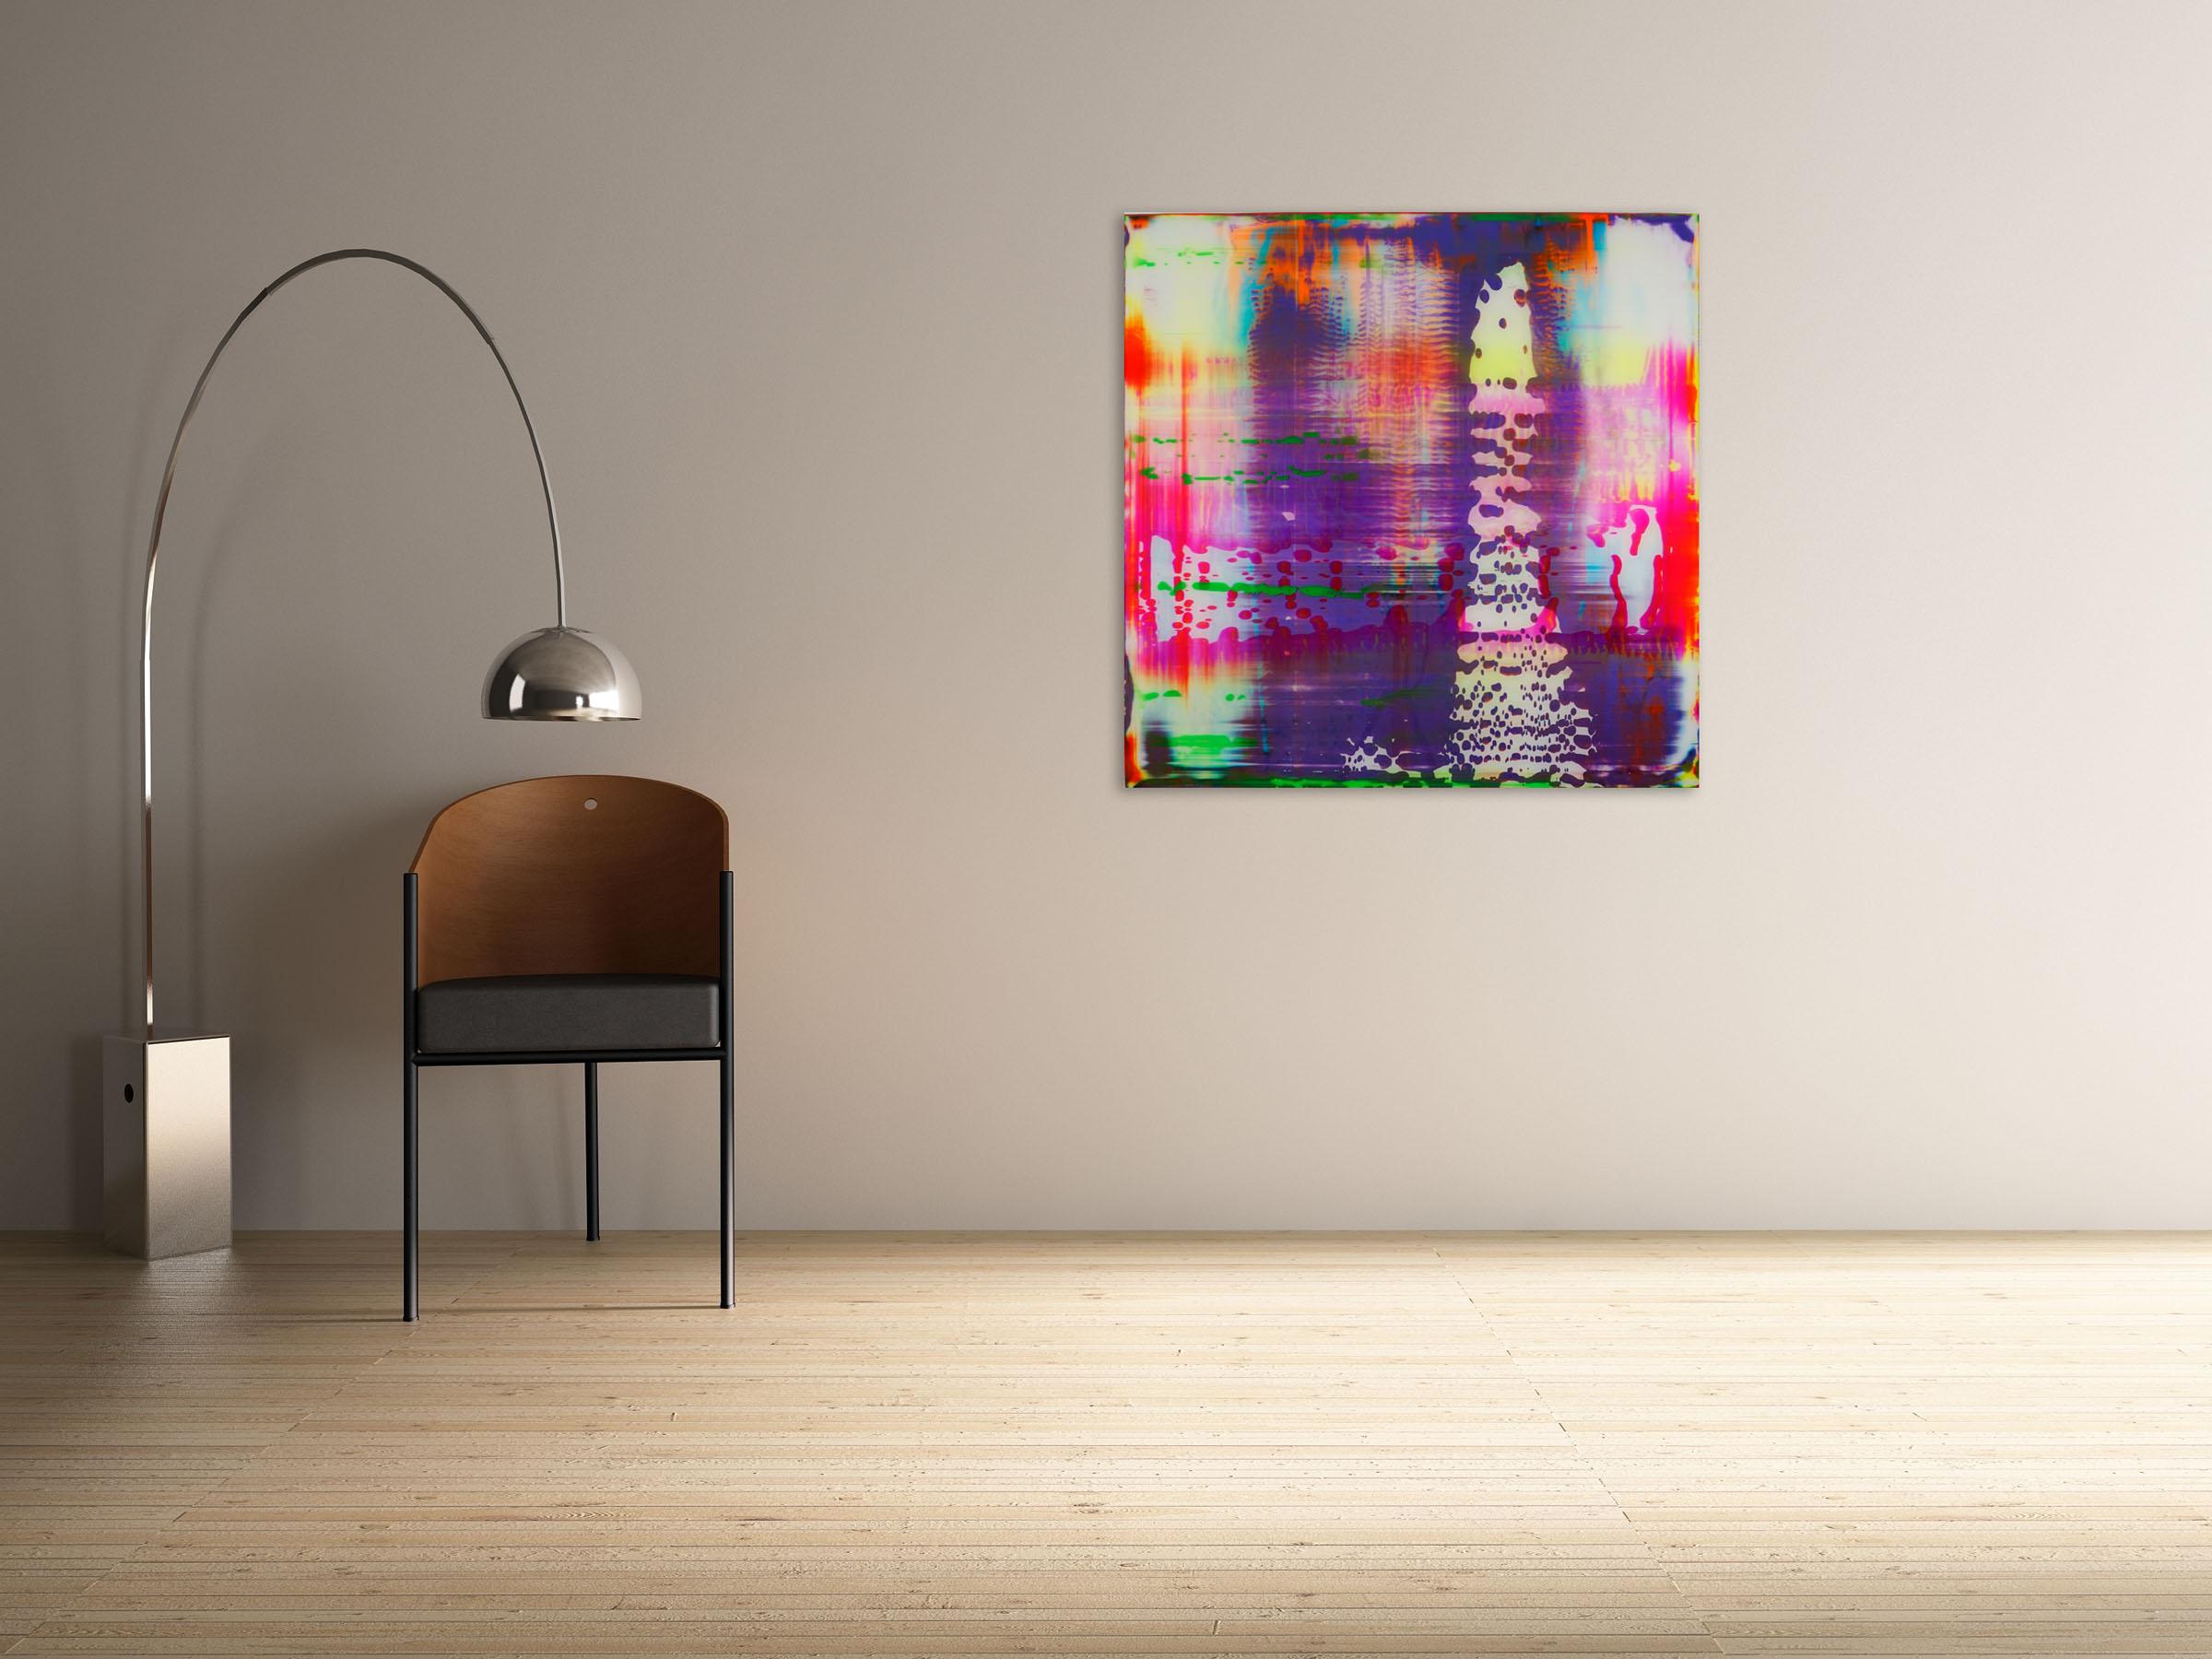 Neon-I (Abstract Painting)

Acrylics, resin, phosphorescence, on wooden board  - Unframed

This artwork is exclusive to IdeelArt. 

Danny Giesbers is a Dutch, autodidact abstract painter who incorporates 21st century developments into his abstract